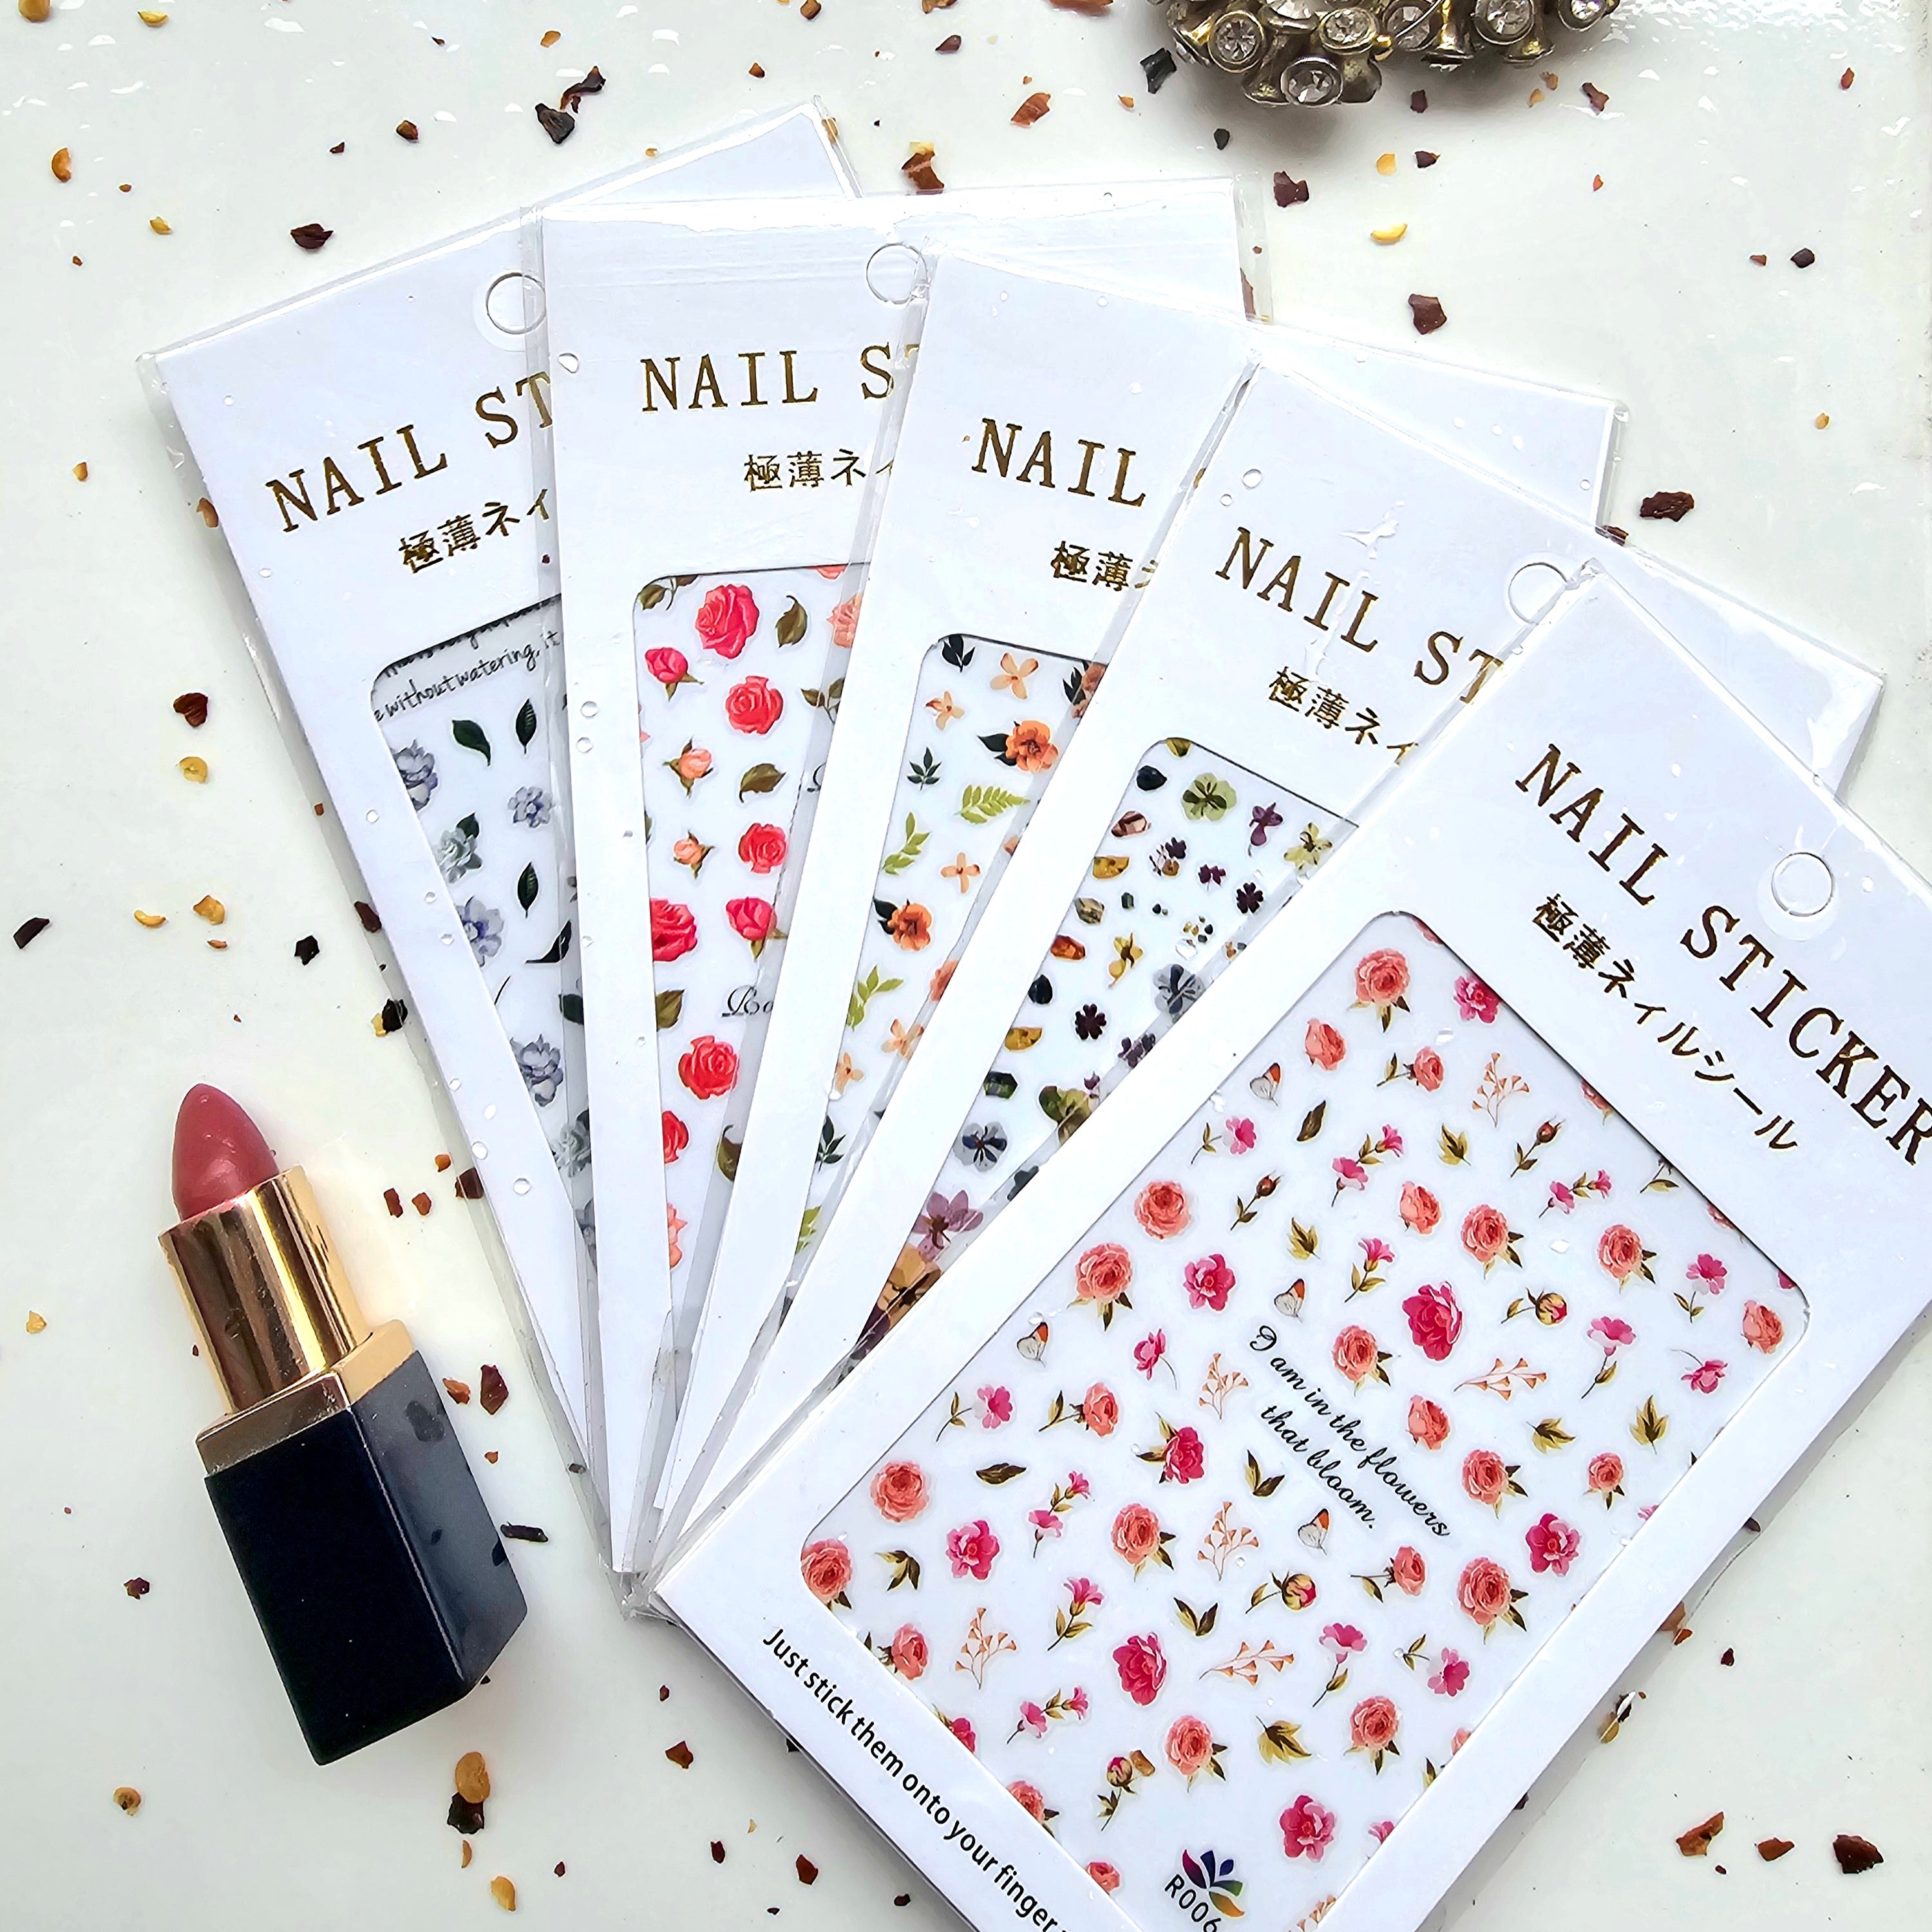 3D Nail Stickers White Flowers Nail Art Decals Paper Sheets Nail Art  Decoration | eBay